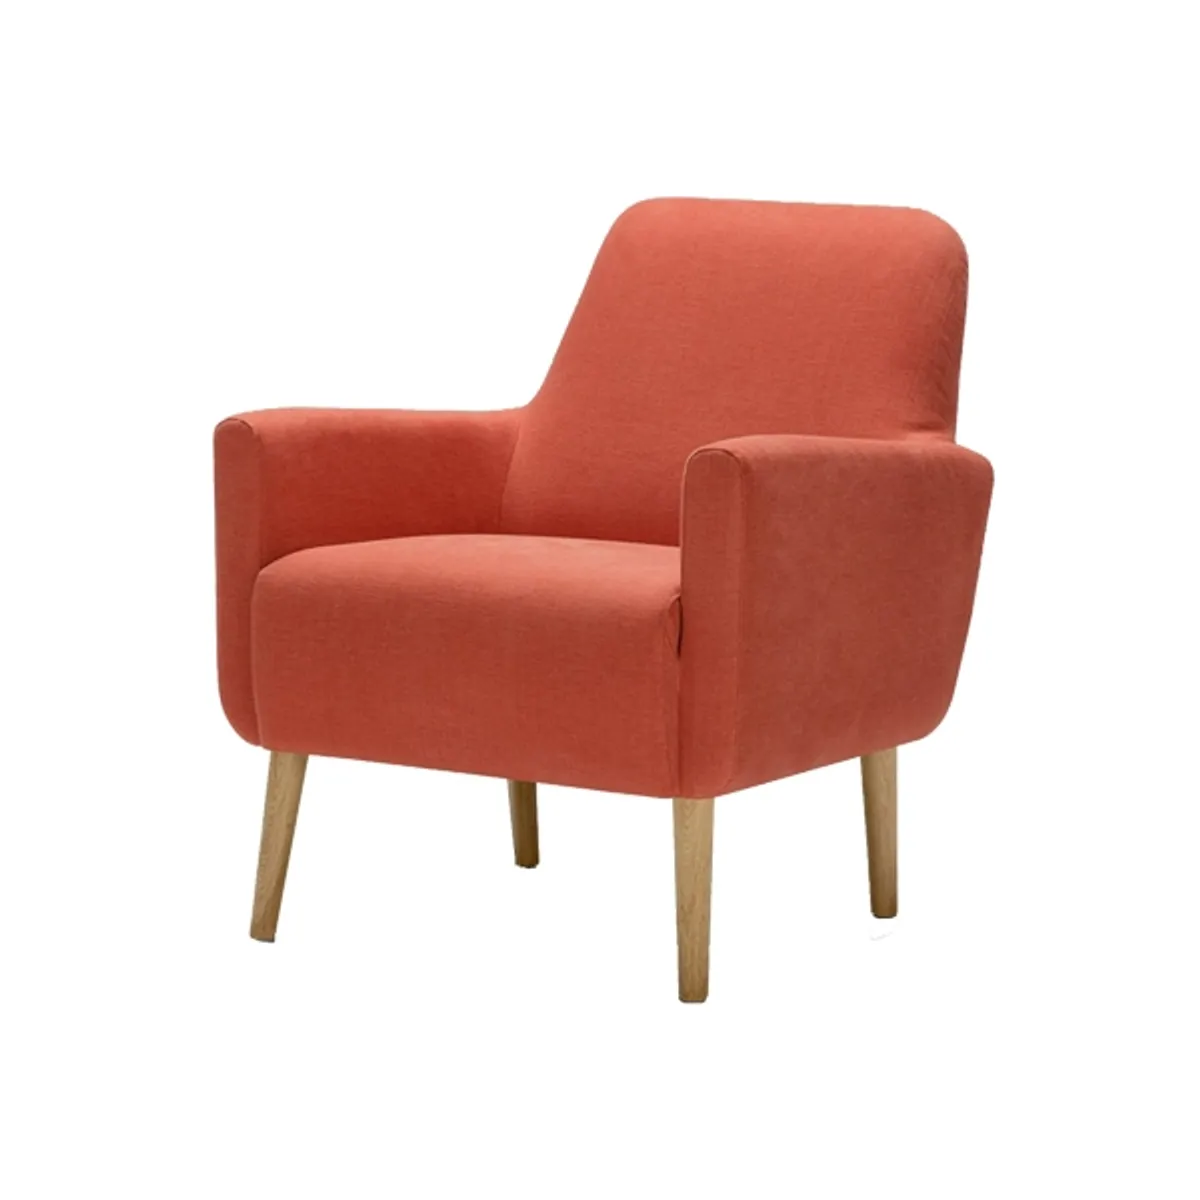 Petunia armchair Inside Out Contracts